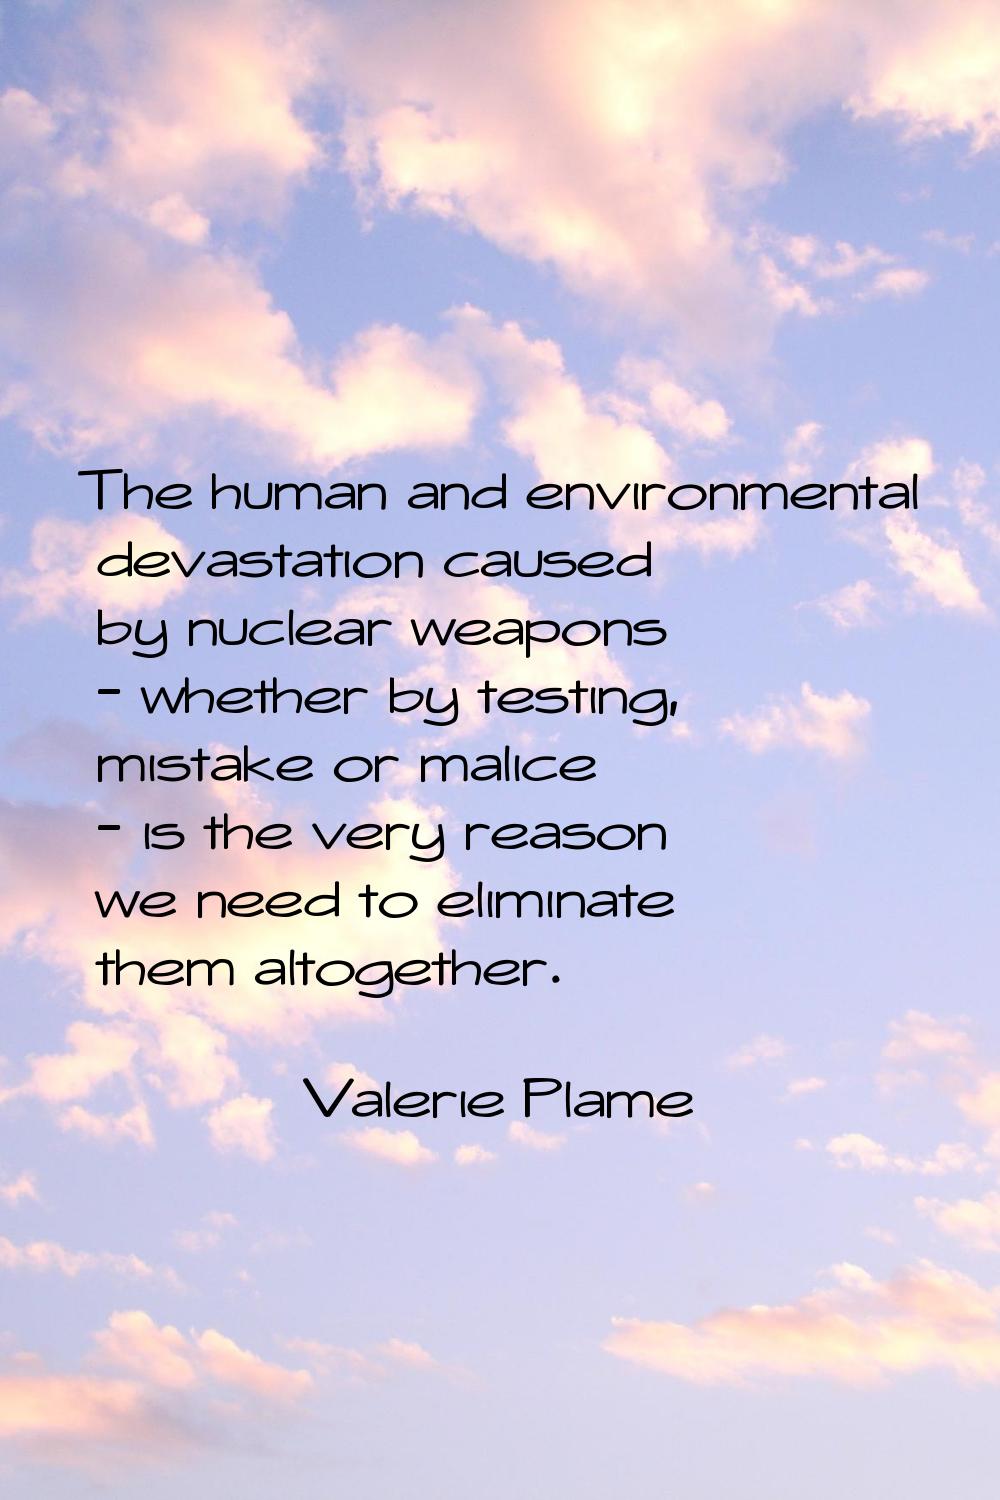 The human and environmental devastation caused by nuclear weapons - whether by testing, mistake or 